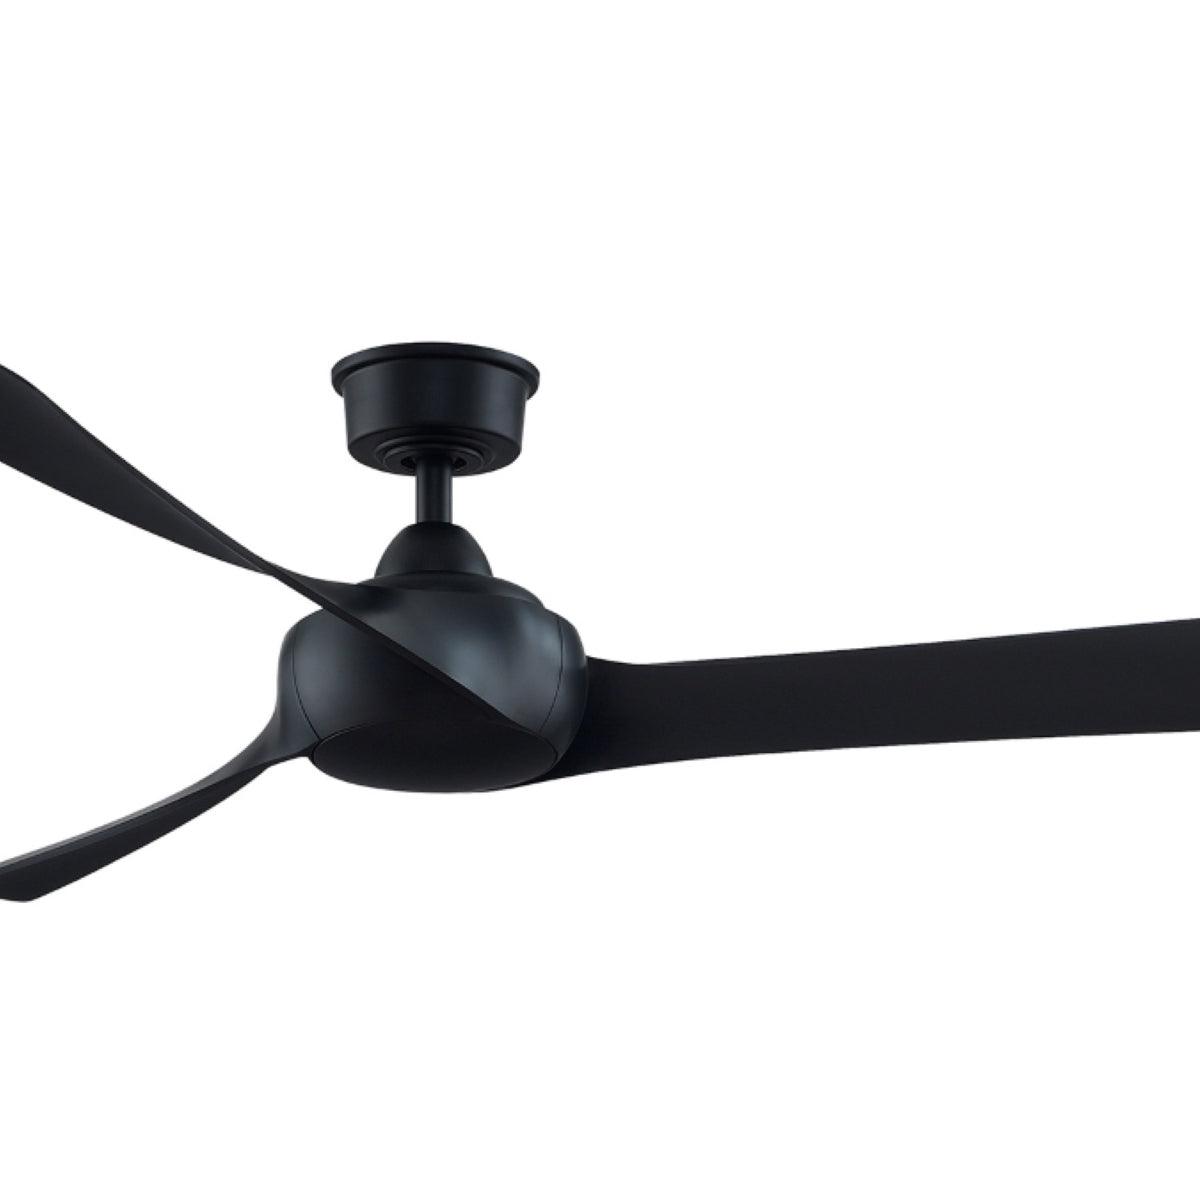 Wrap Custom Indoor/Outdoor Ceiling Fan Motor With Remote, Black Finish, 44-60" Blades Sold Separately - Bees Lighting